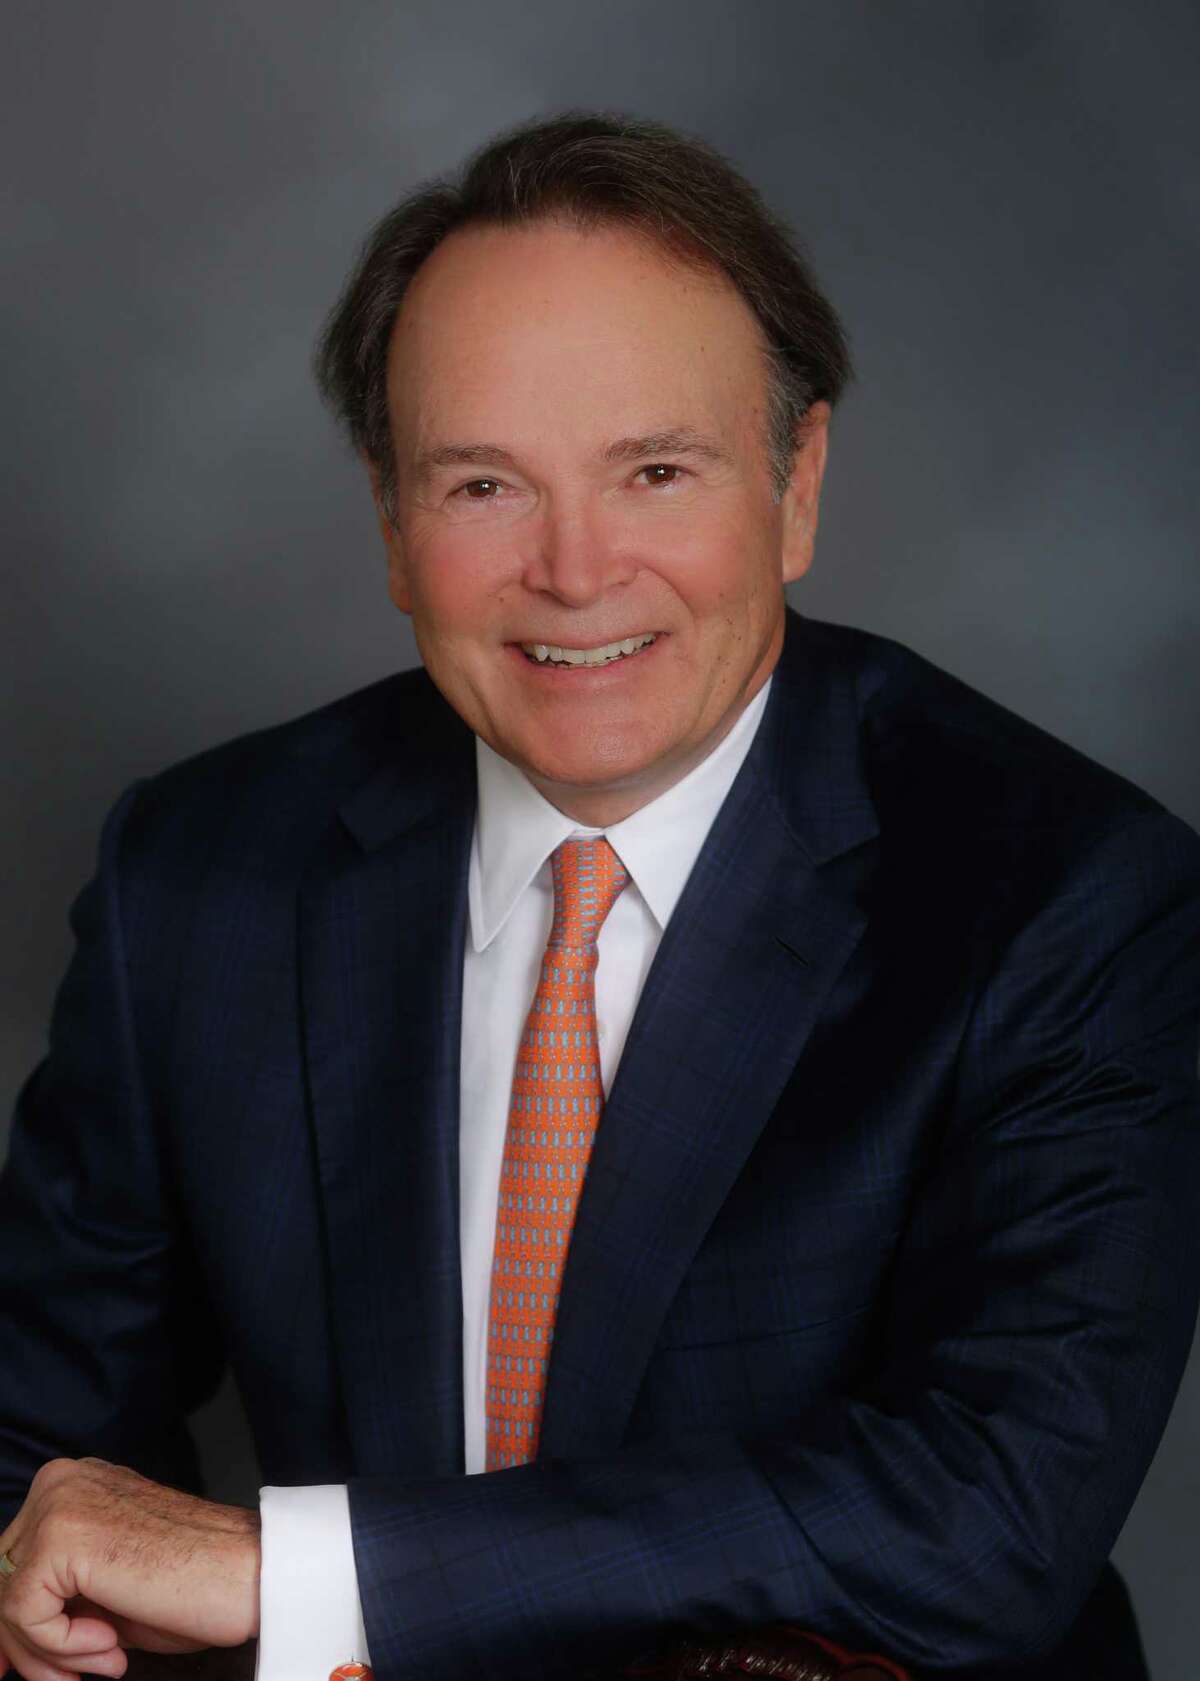 Ed Jones is chairman and chief executive officer of Gulf Capital Bank.